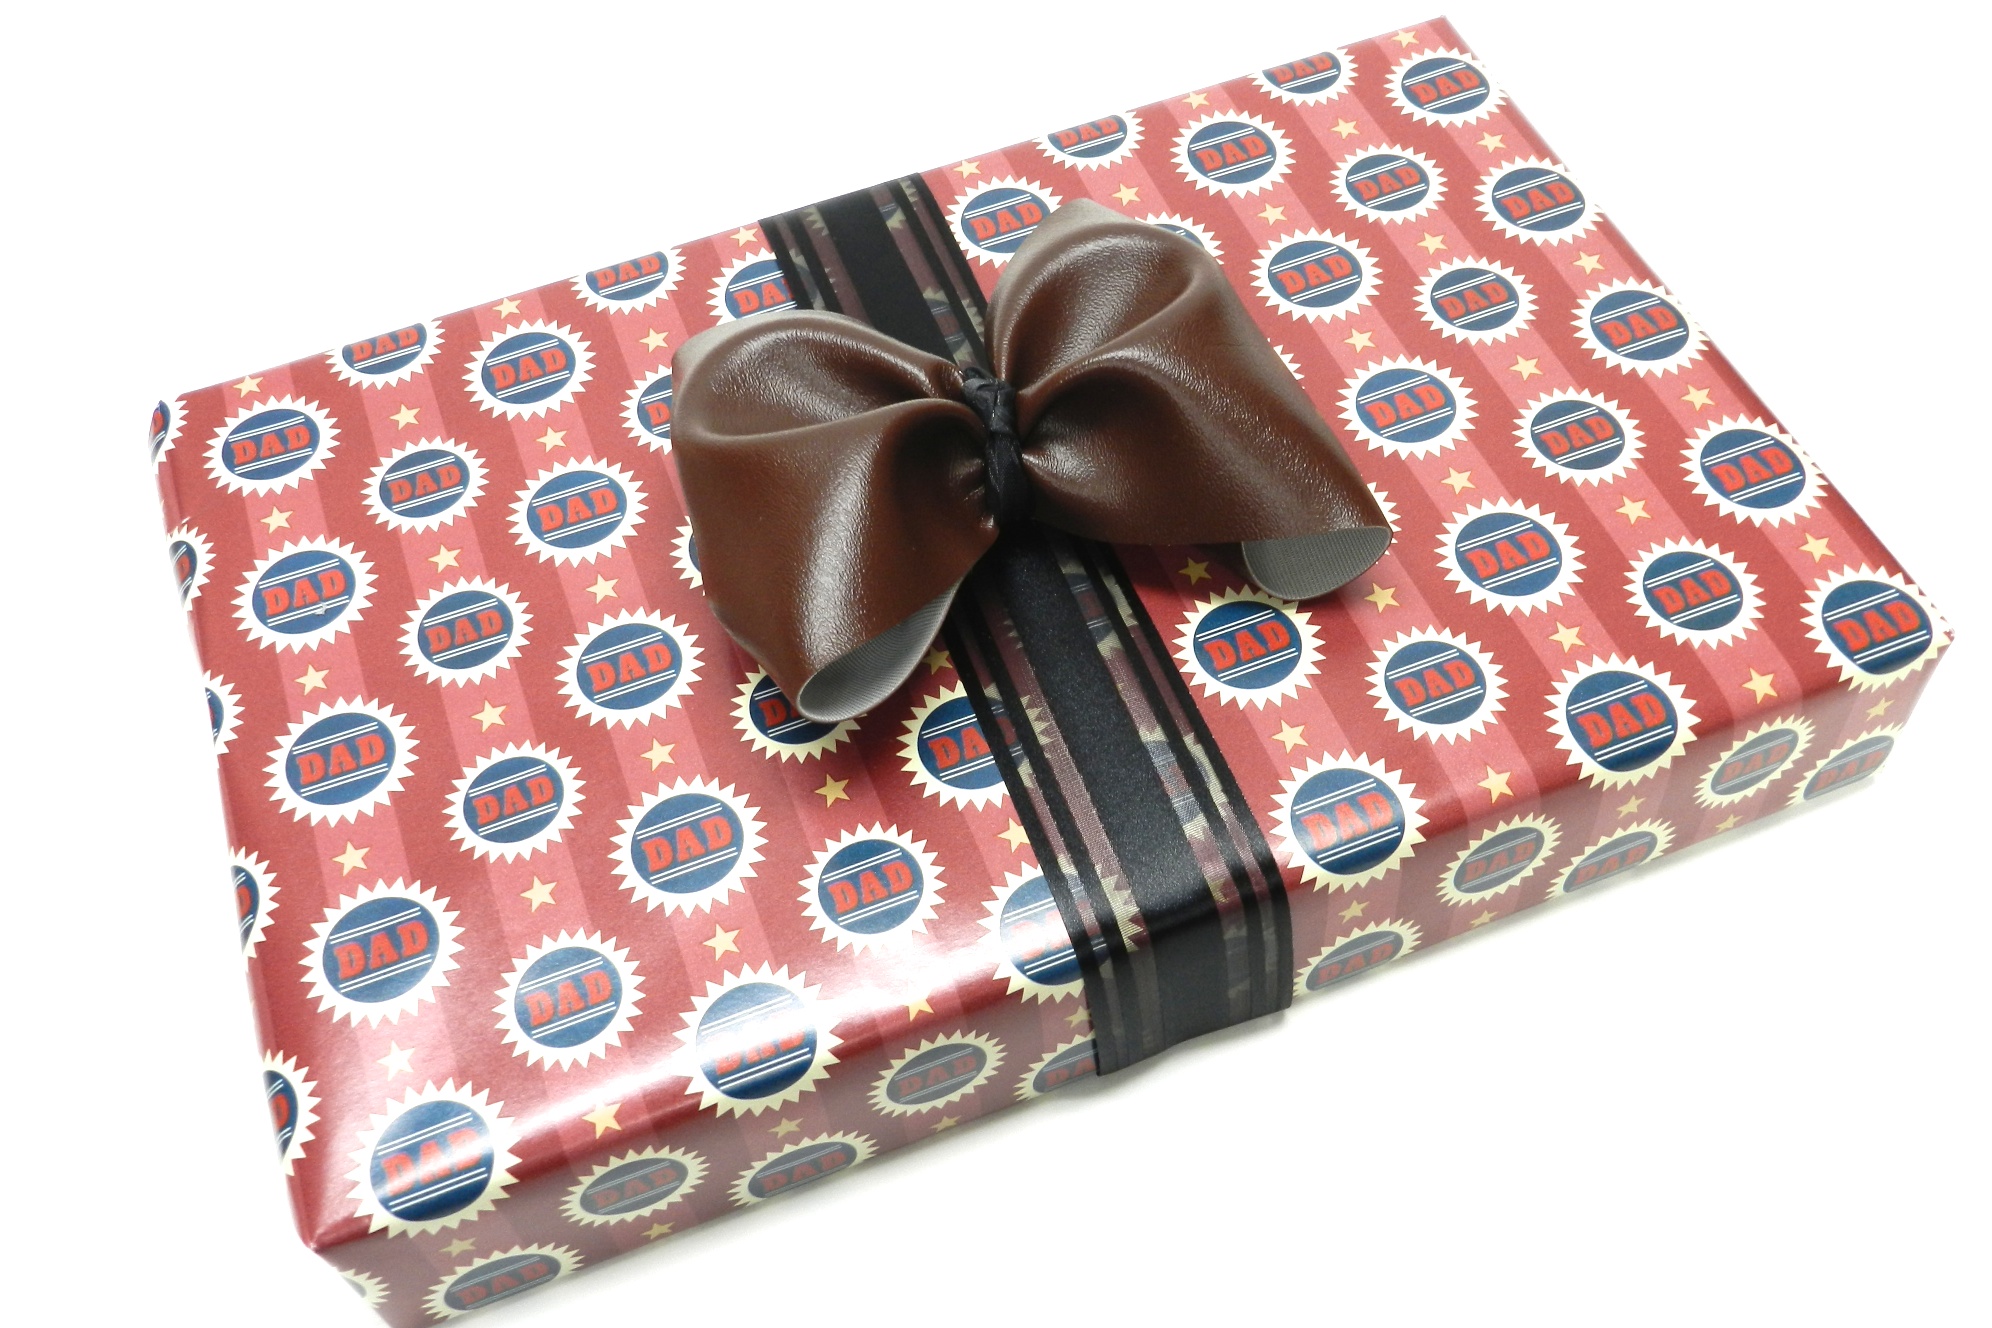 Gift Wrapping With Bowdabra Makes It A Beautiful Gift Idea Inside